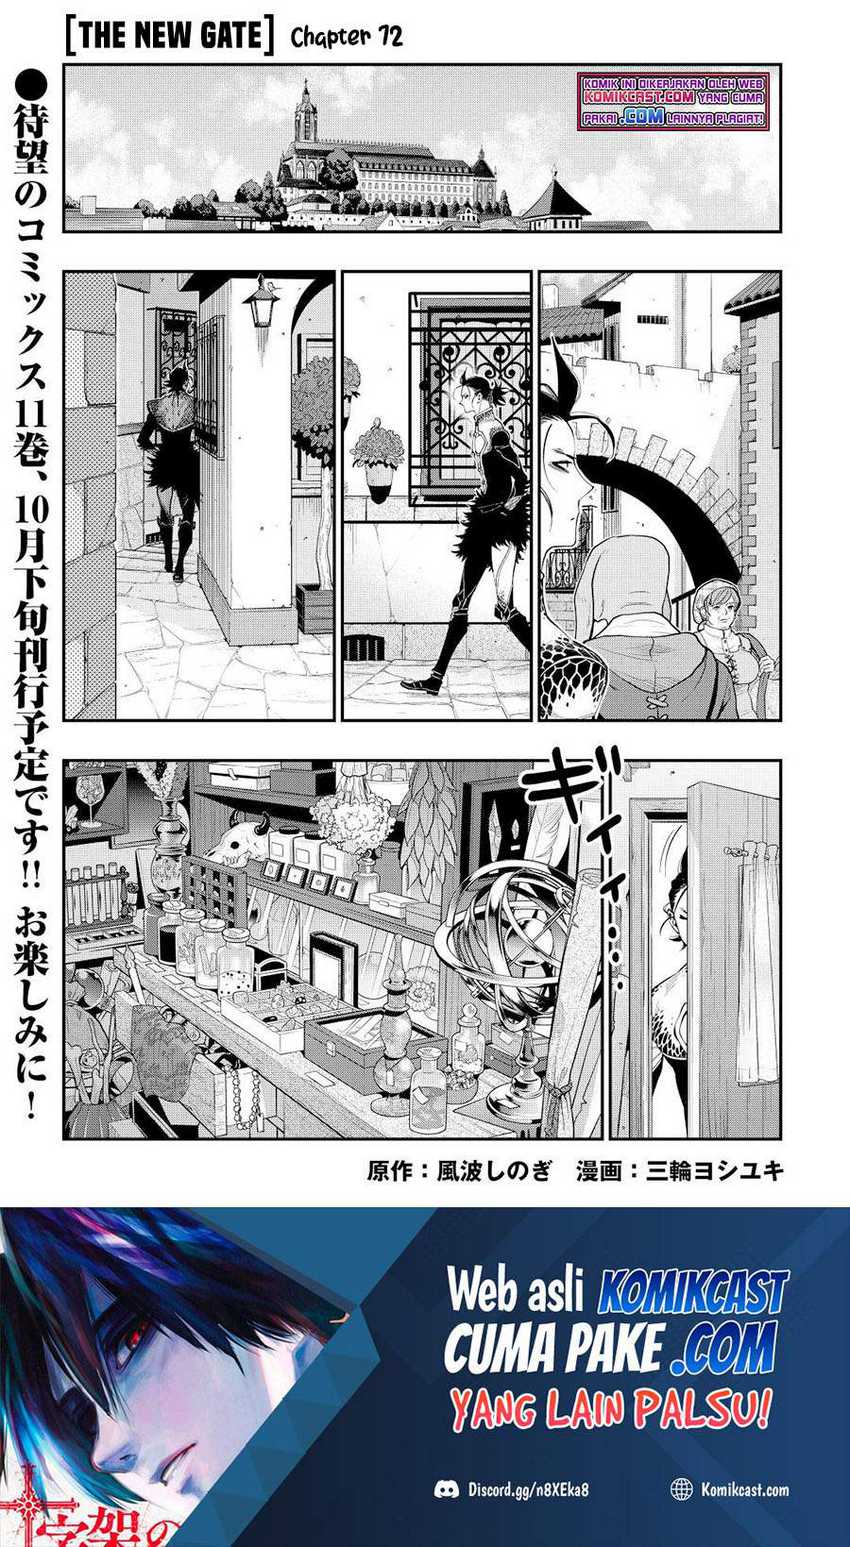 The New Gate Chapter 72